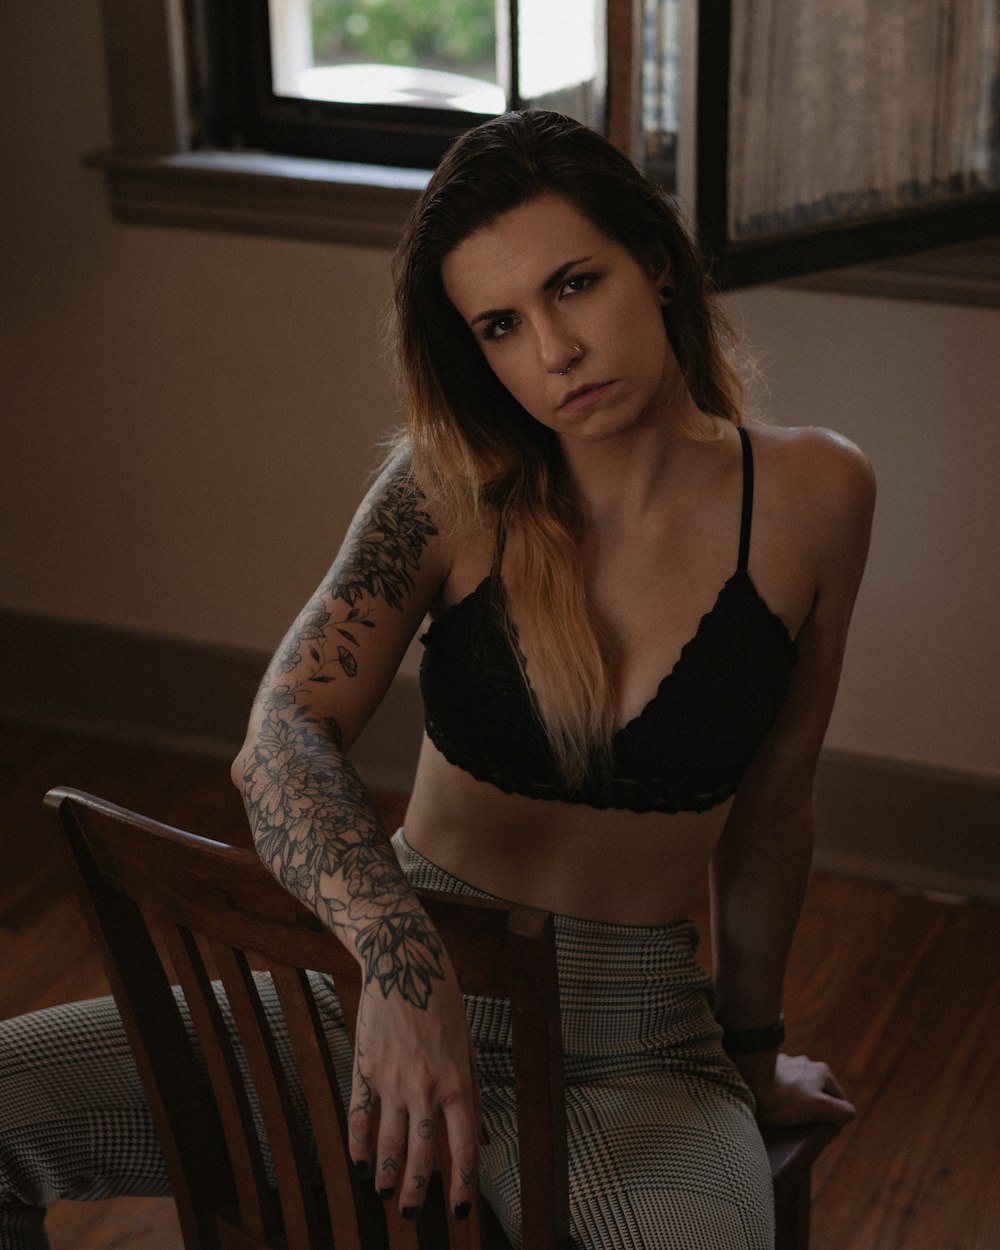 woman in black brassiere and gray pants sitting on brown wooden chair